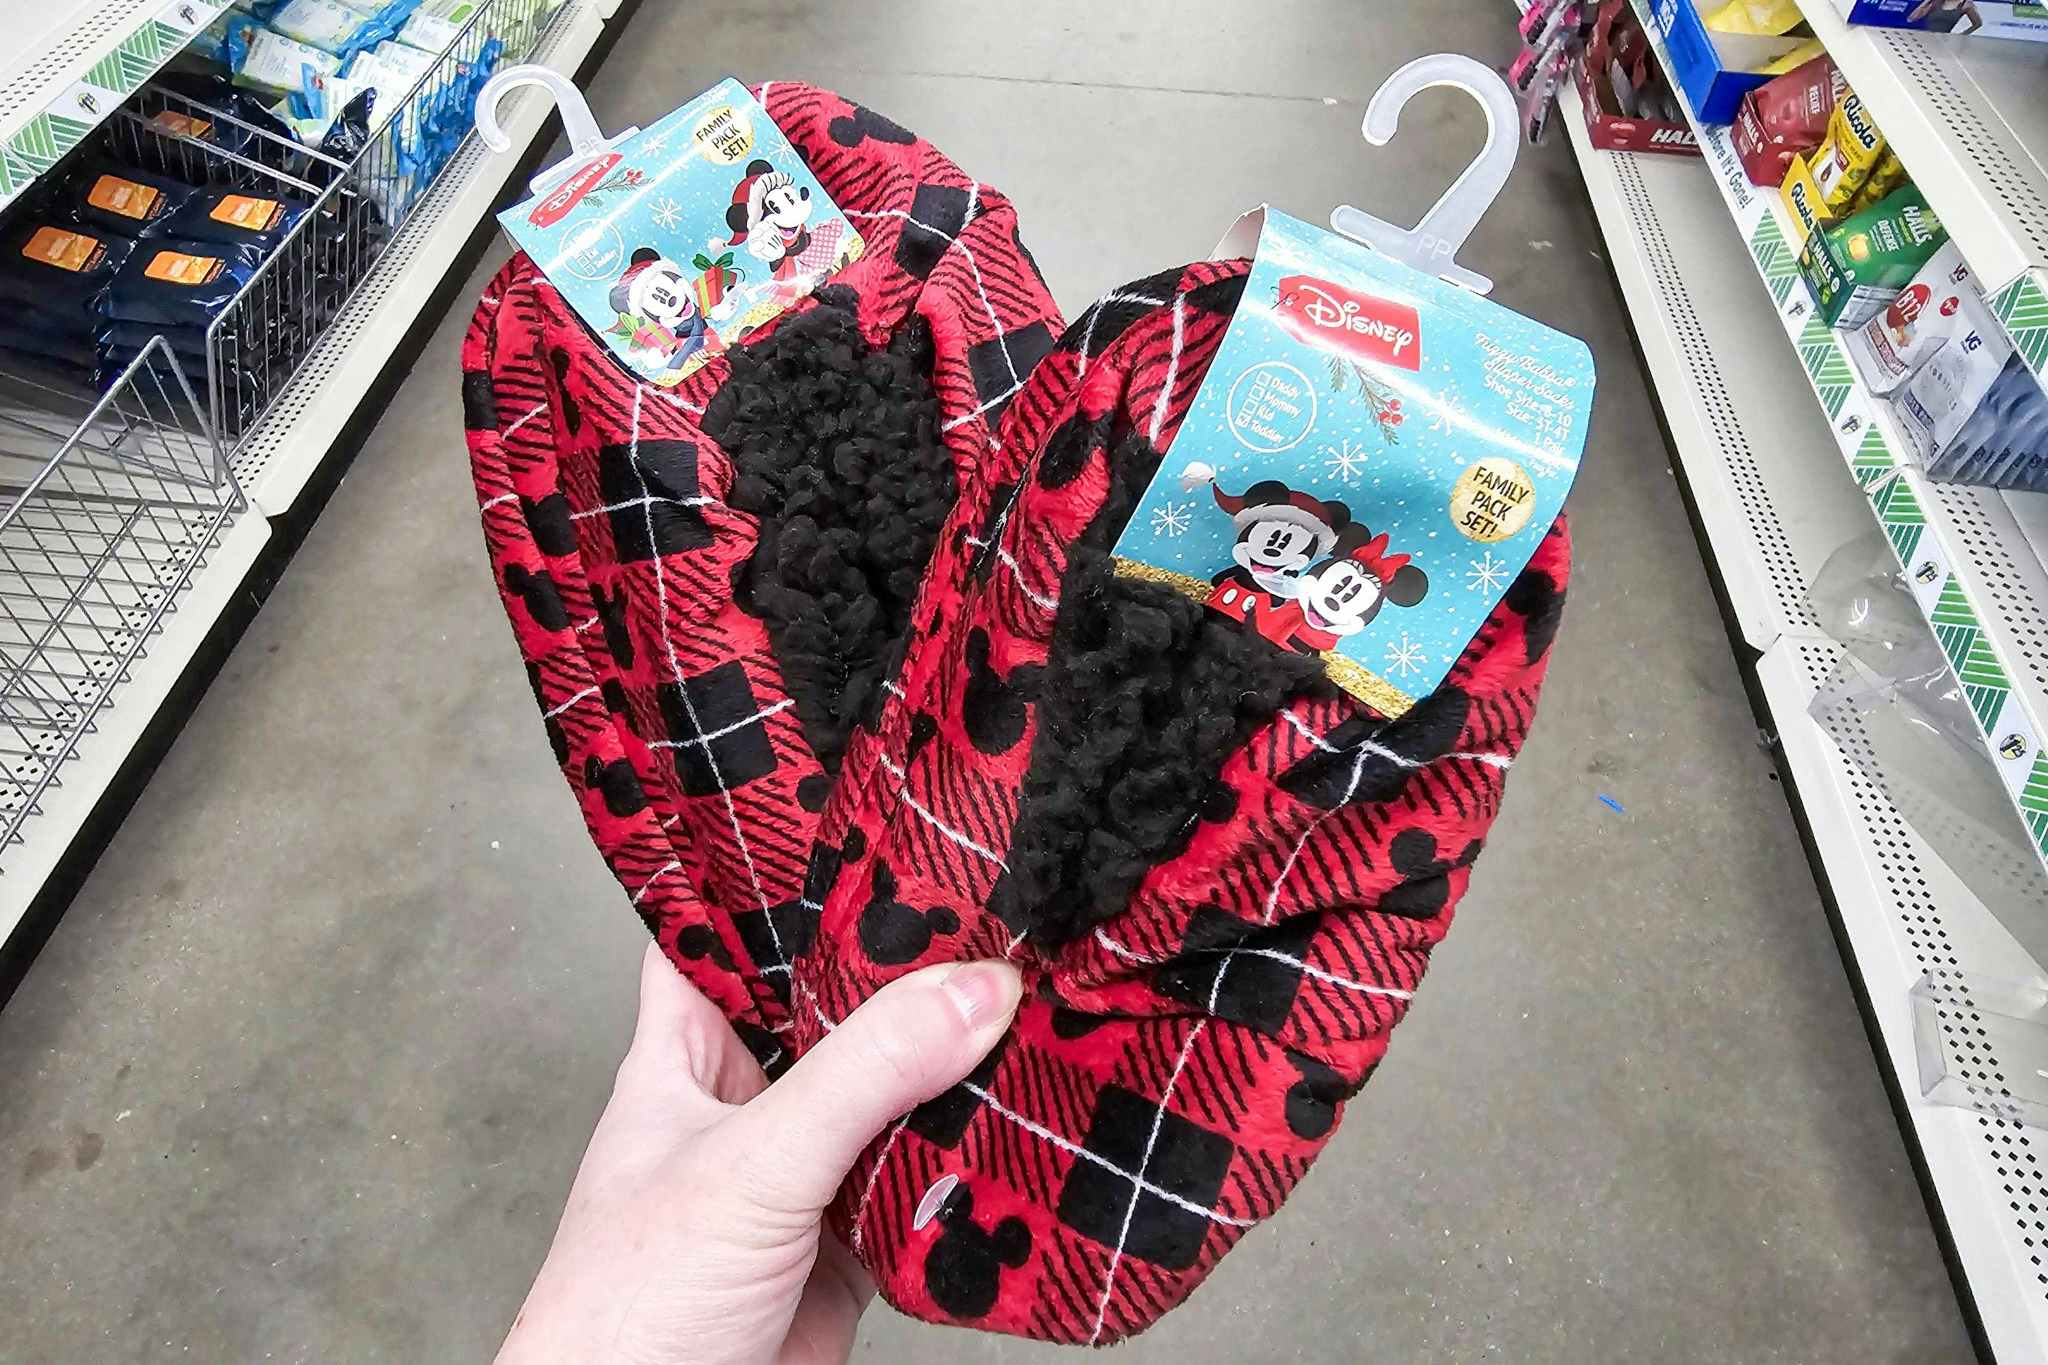 Disney Slippers for Kids and Adults, Just $1.25 at Dollar Tree ($12 Value)